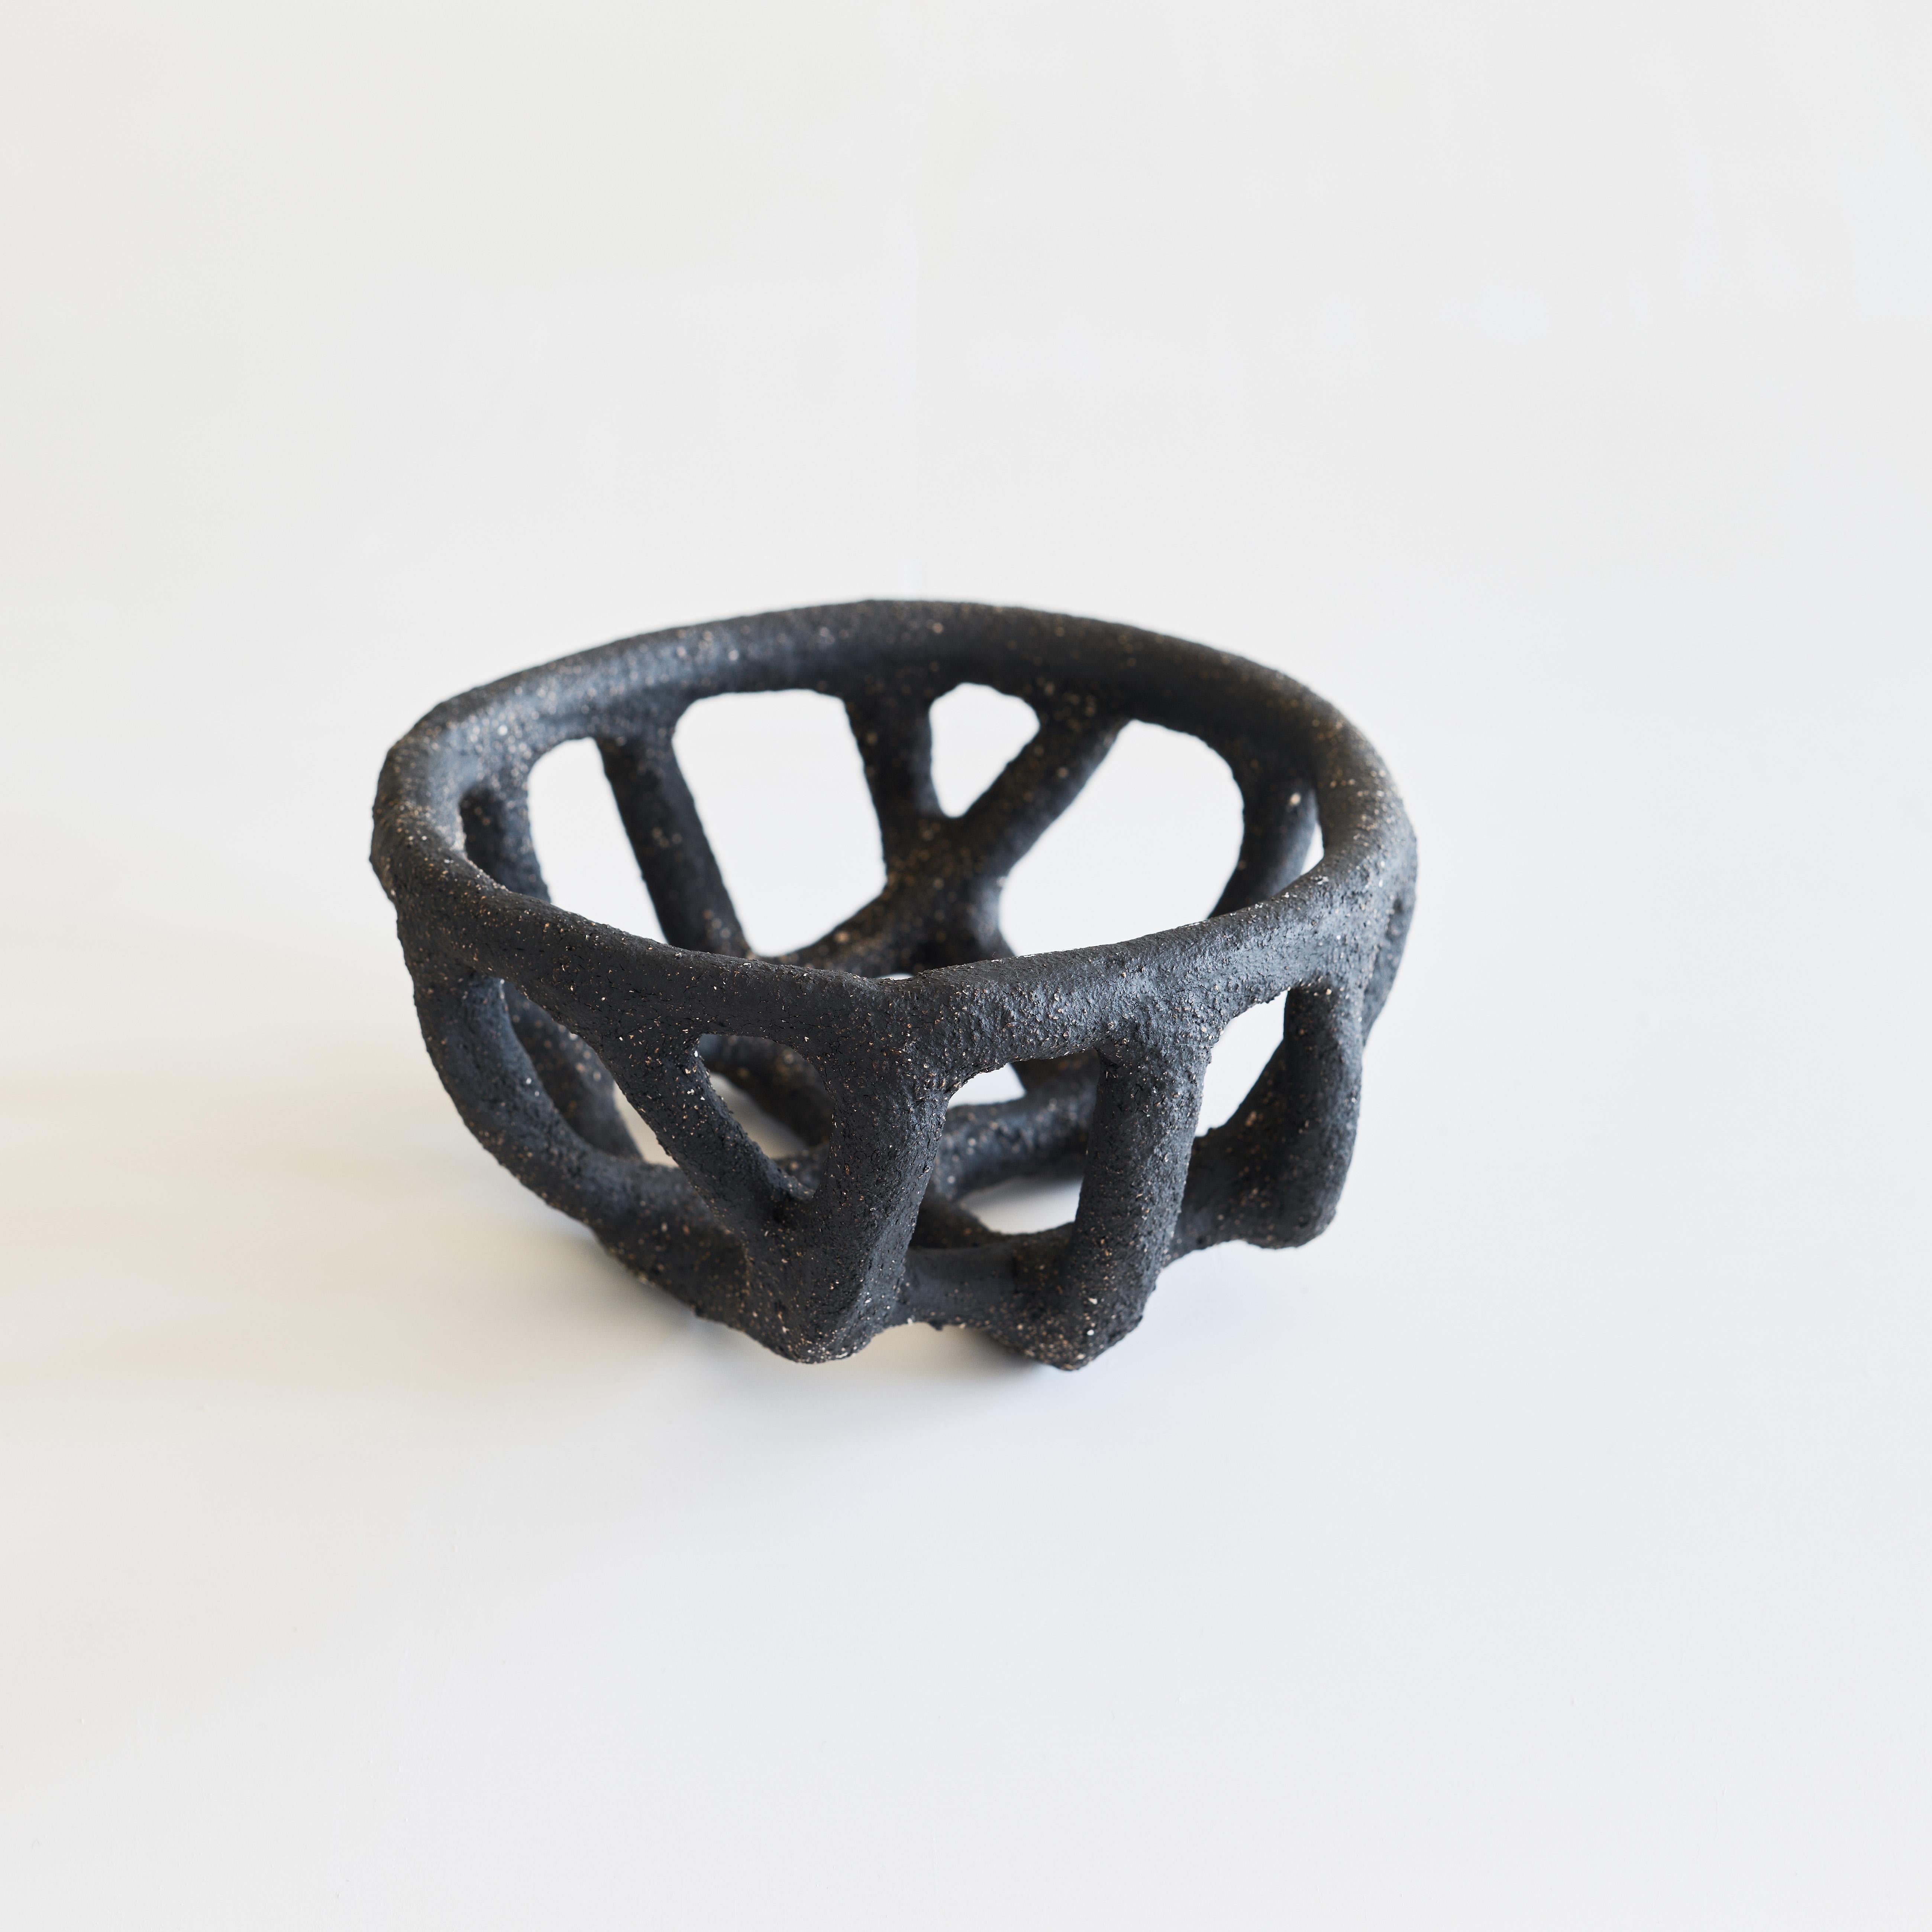 La Corbeille XIII small by Claire Pain 
Dimensions: D 25 x H 10 cm
Materials: raw stoneware

Fragility and delicacy arise from a raw material, in which strength and vigour intertwine to give shape to the singular work of Claire Pain.
Modeled